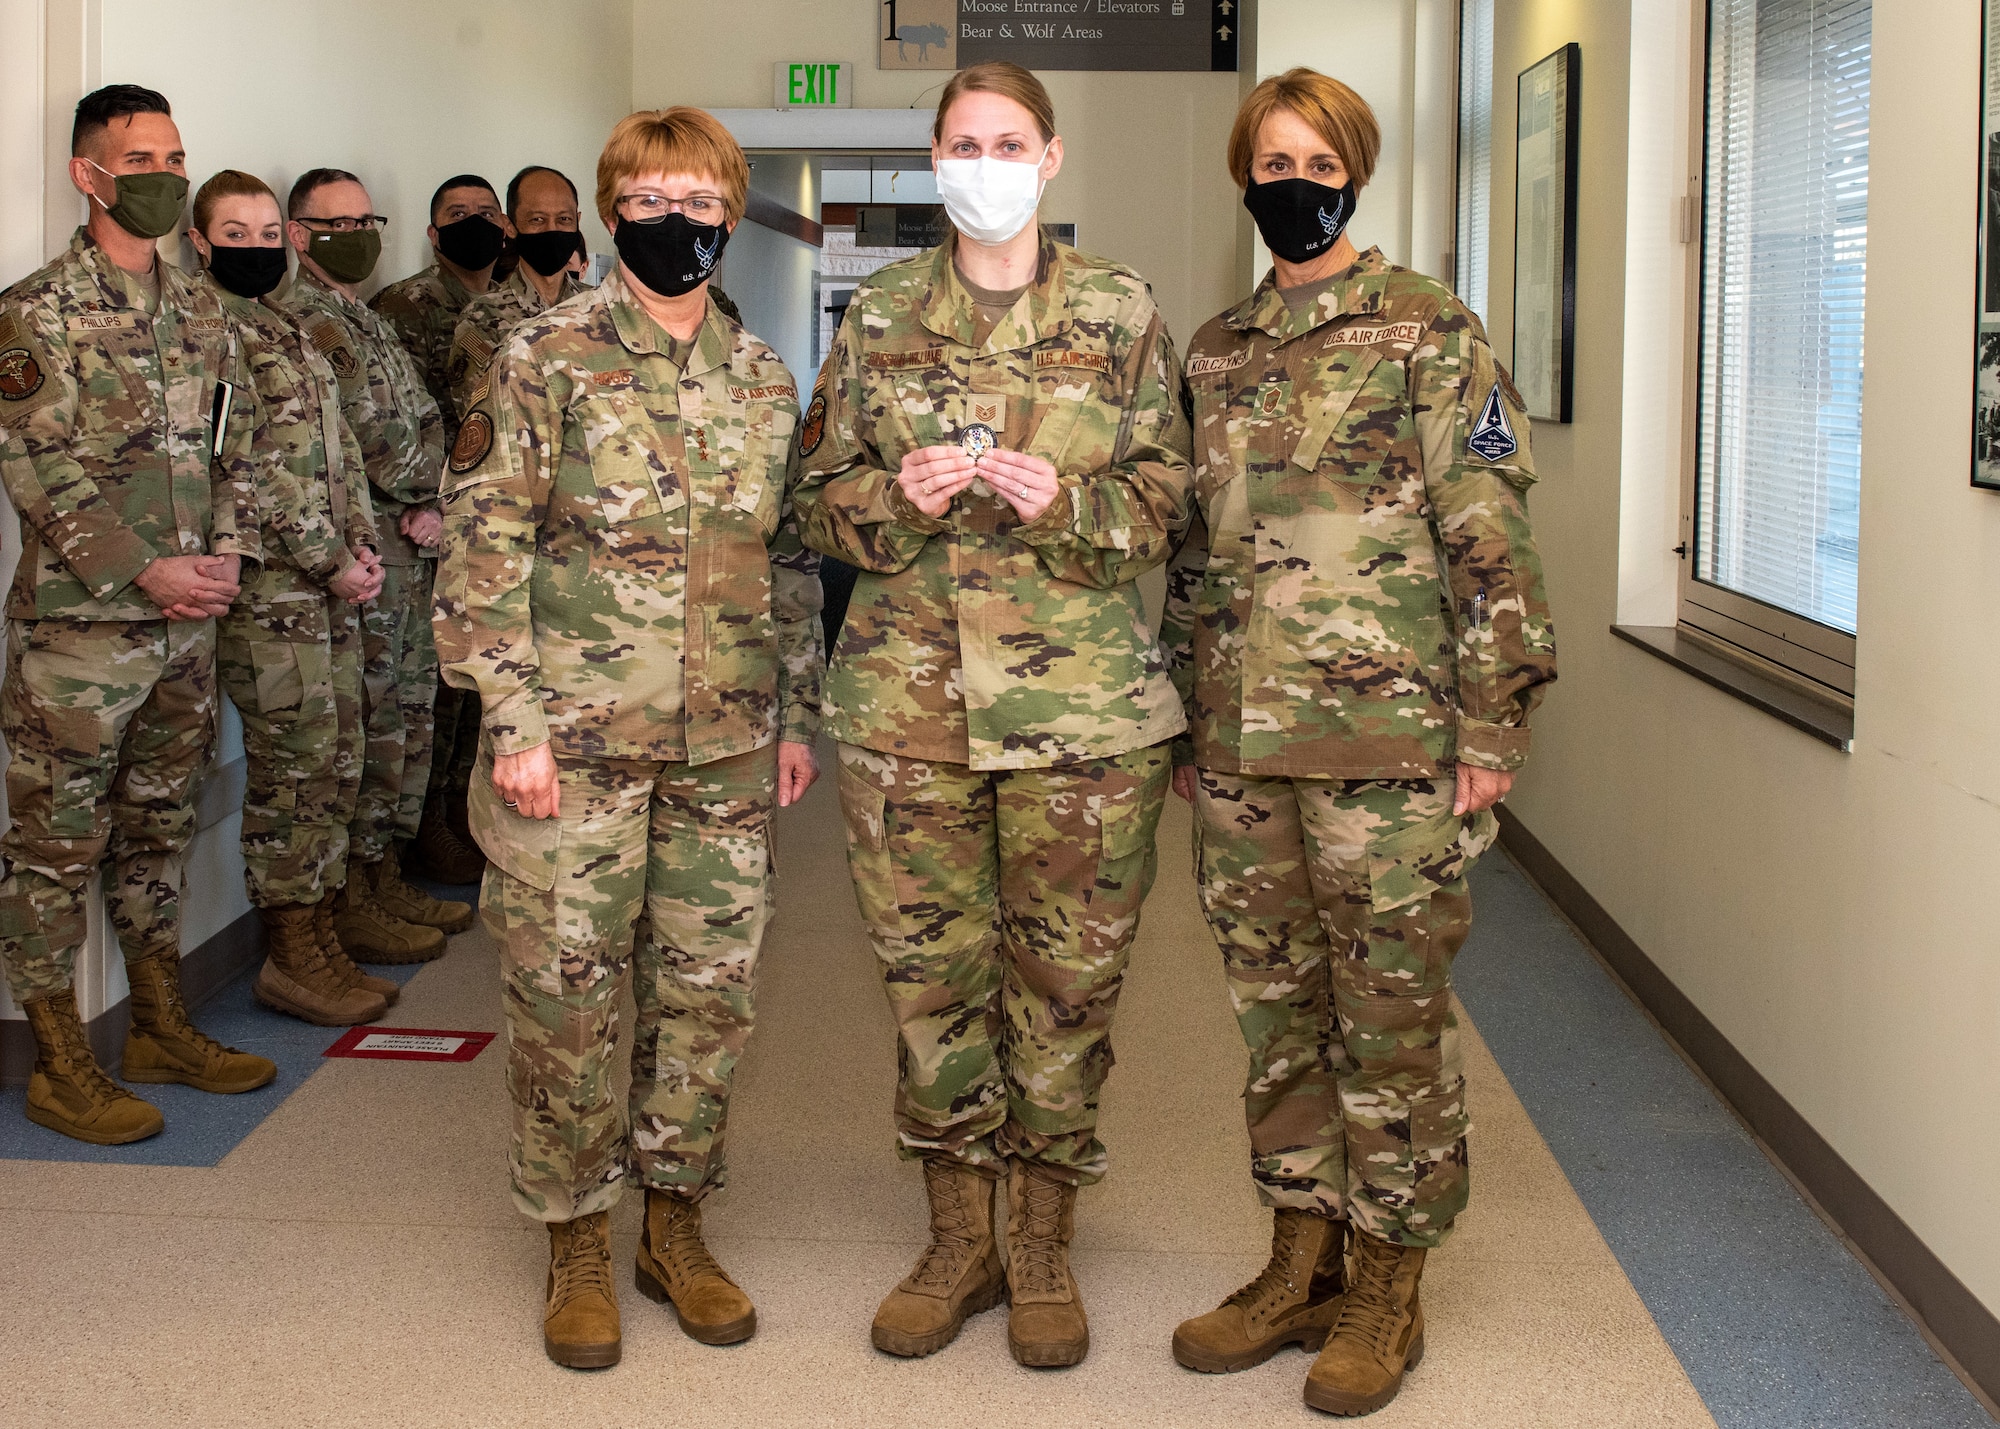 U.S. Air and Space Force Lt. Gen. Dorothy Hogg, surgeon general, and Chief Master Sgt. Dawn Kolczynski, Office of the Surgeon General medical enlisted force and enlisted corps chief, visit the 673d Medical Group at Joint Base Elmendorf-Richardson, Alaska, April 26, 2021. Hogg and Kolczynski focused on readiness and innovation as they toured the hospital, recognized and connected with medics, and discussed the 673d MDG’s capabilities, operations, innovations, COVID-19 management and vaccine rollout, and plans for improvement.